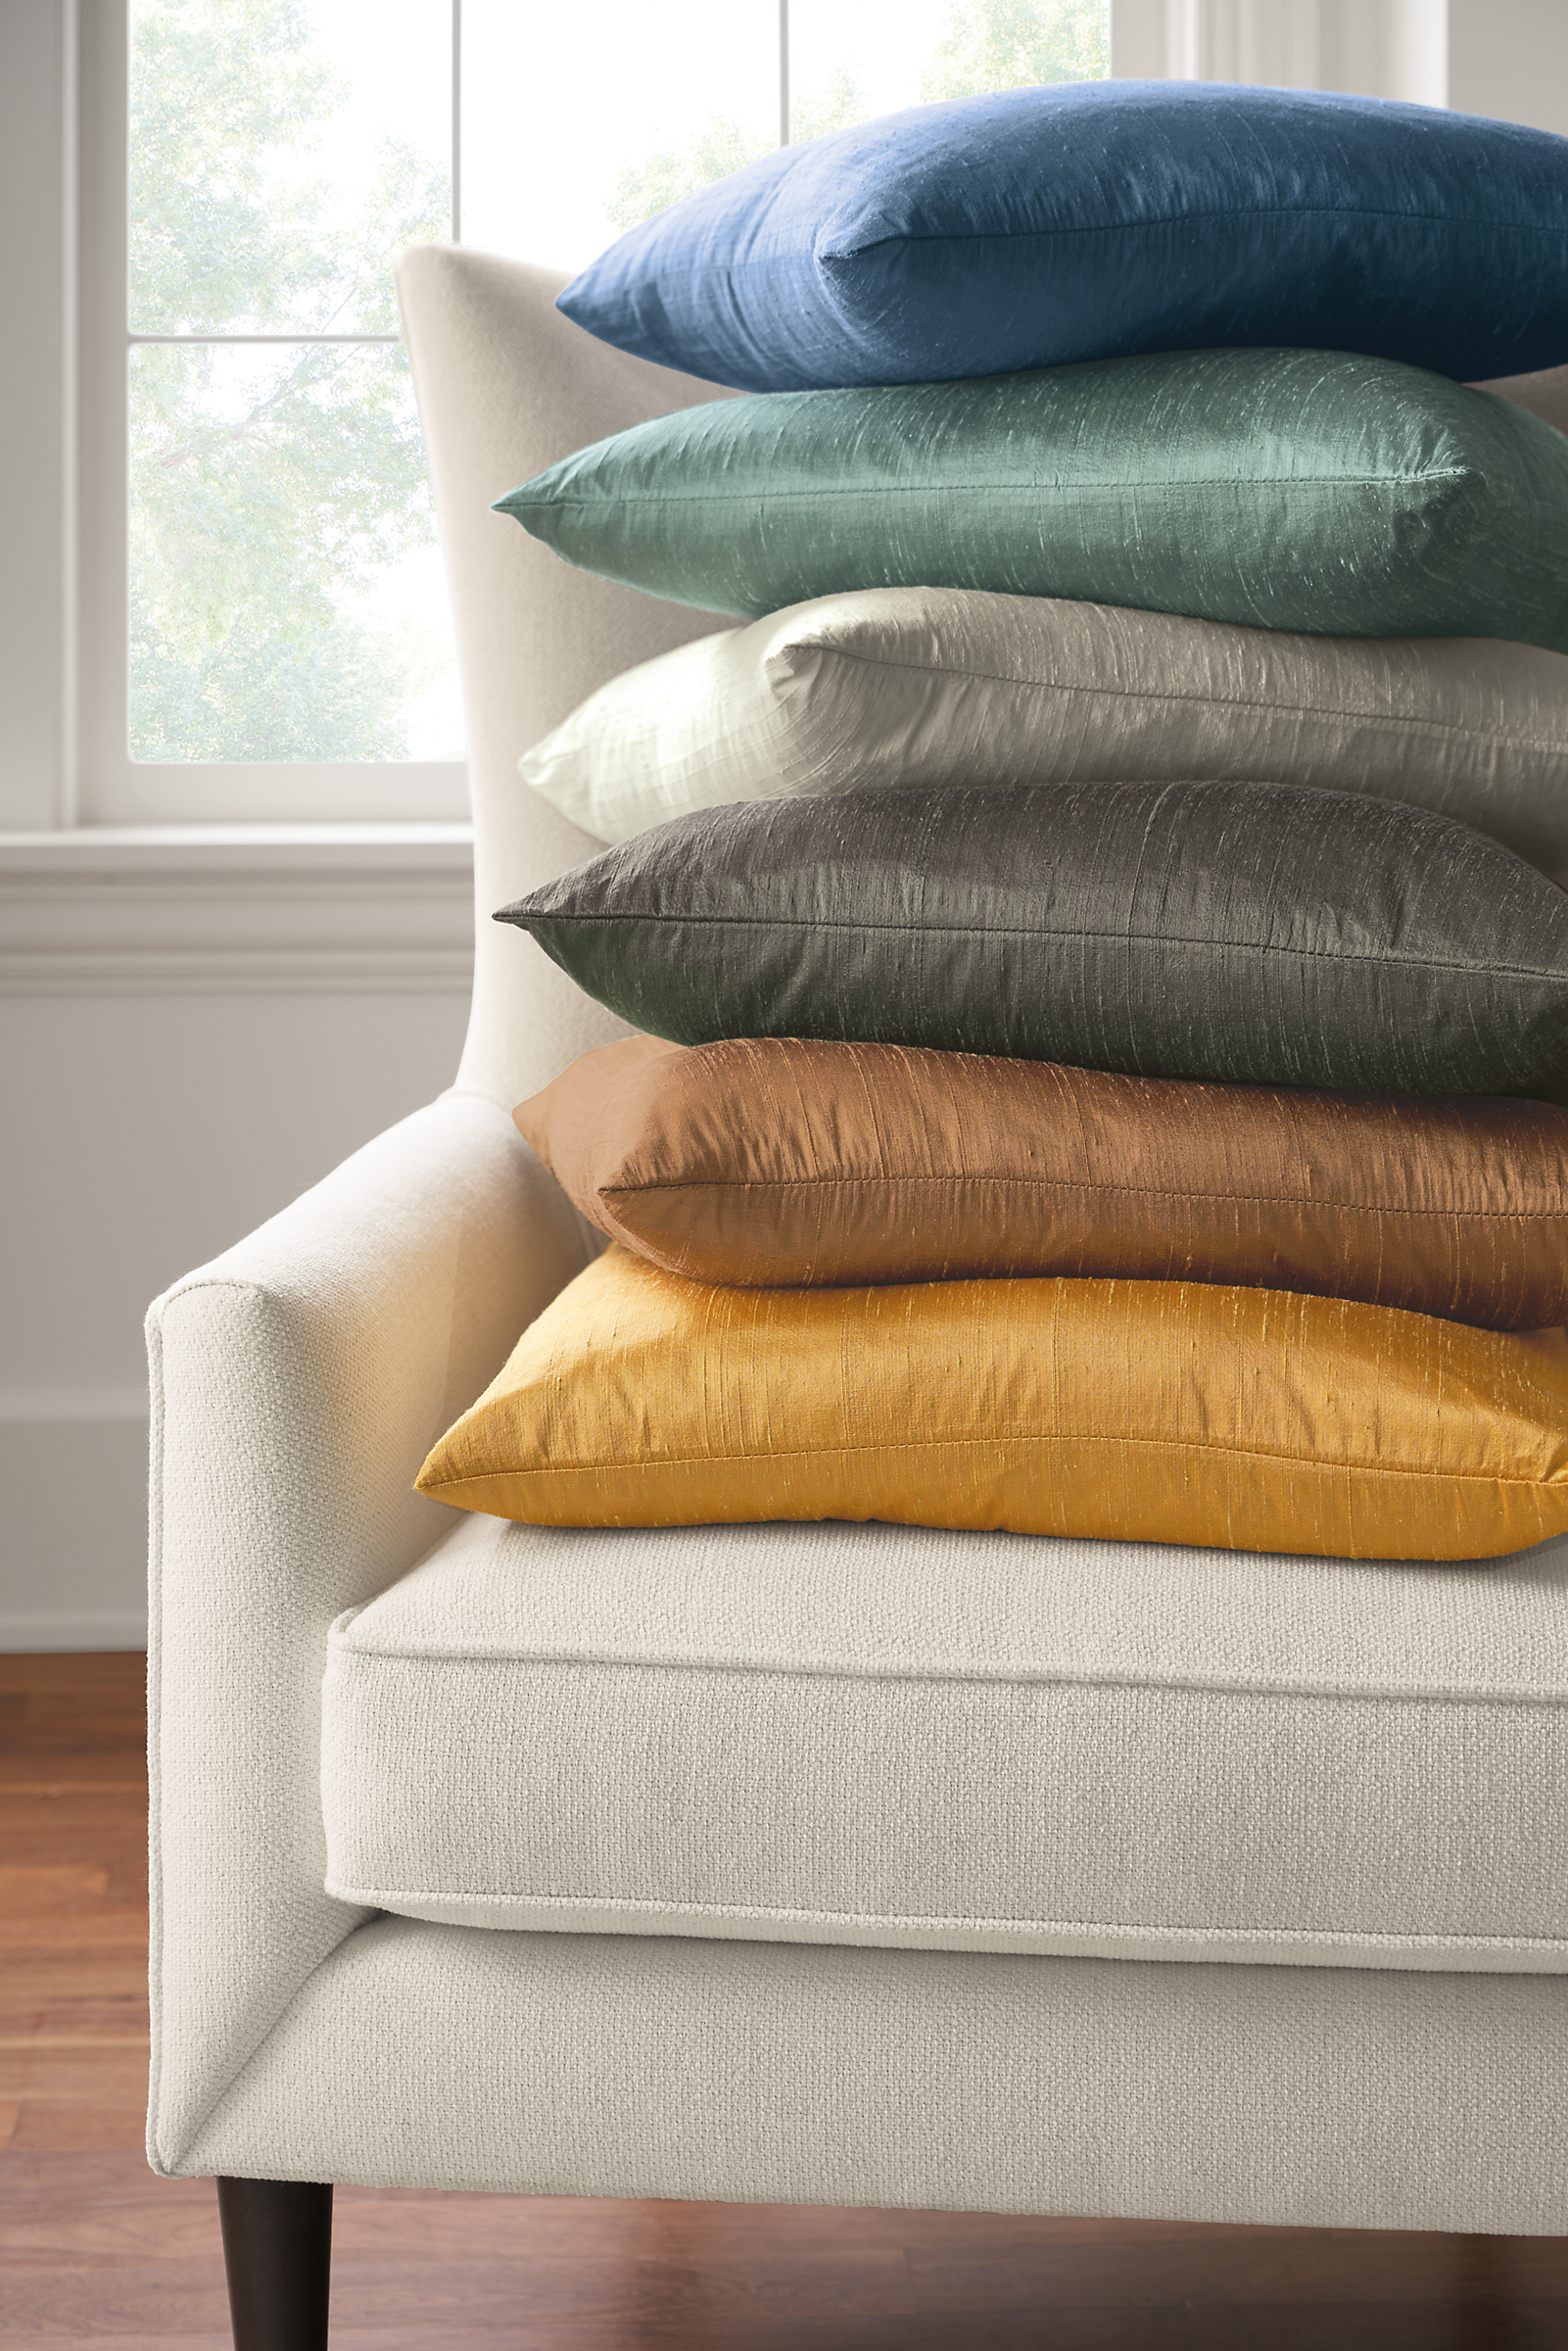 six silk pillows of various colors on a chair.